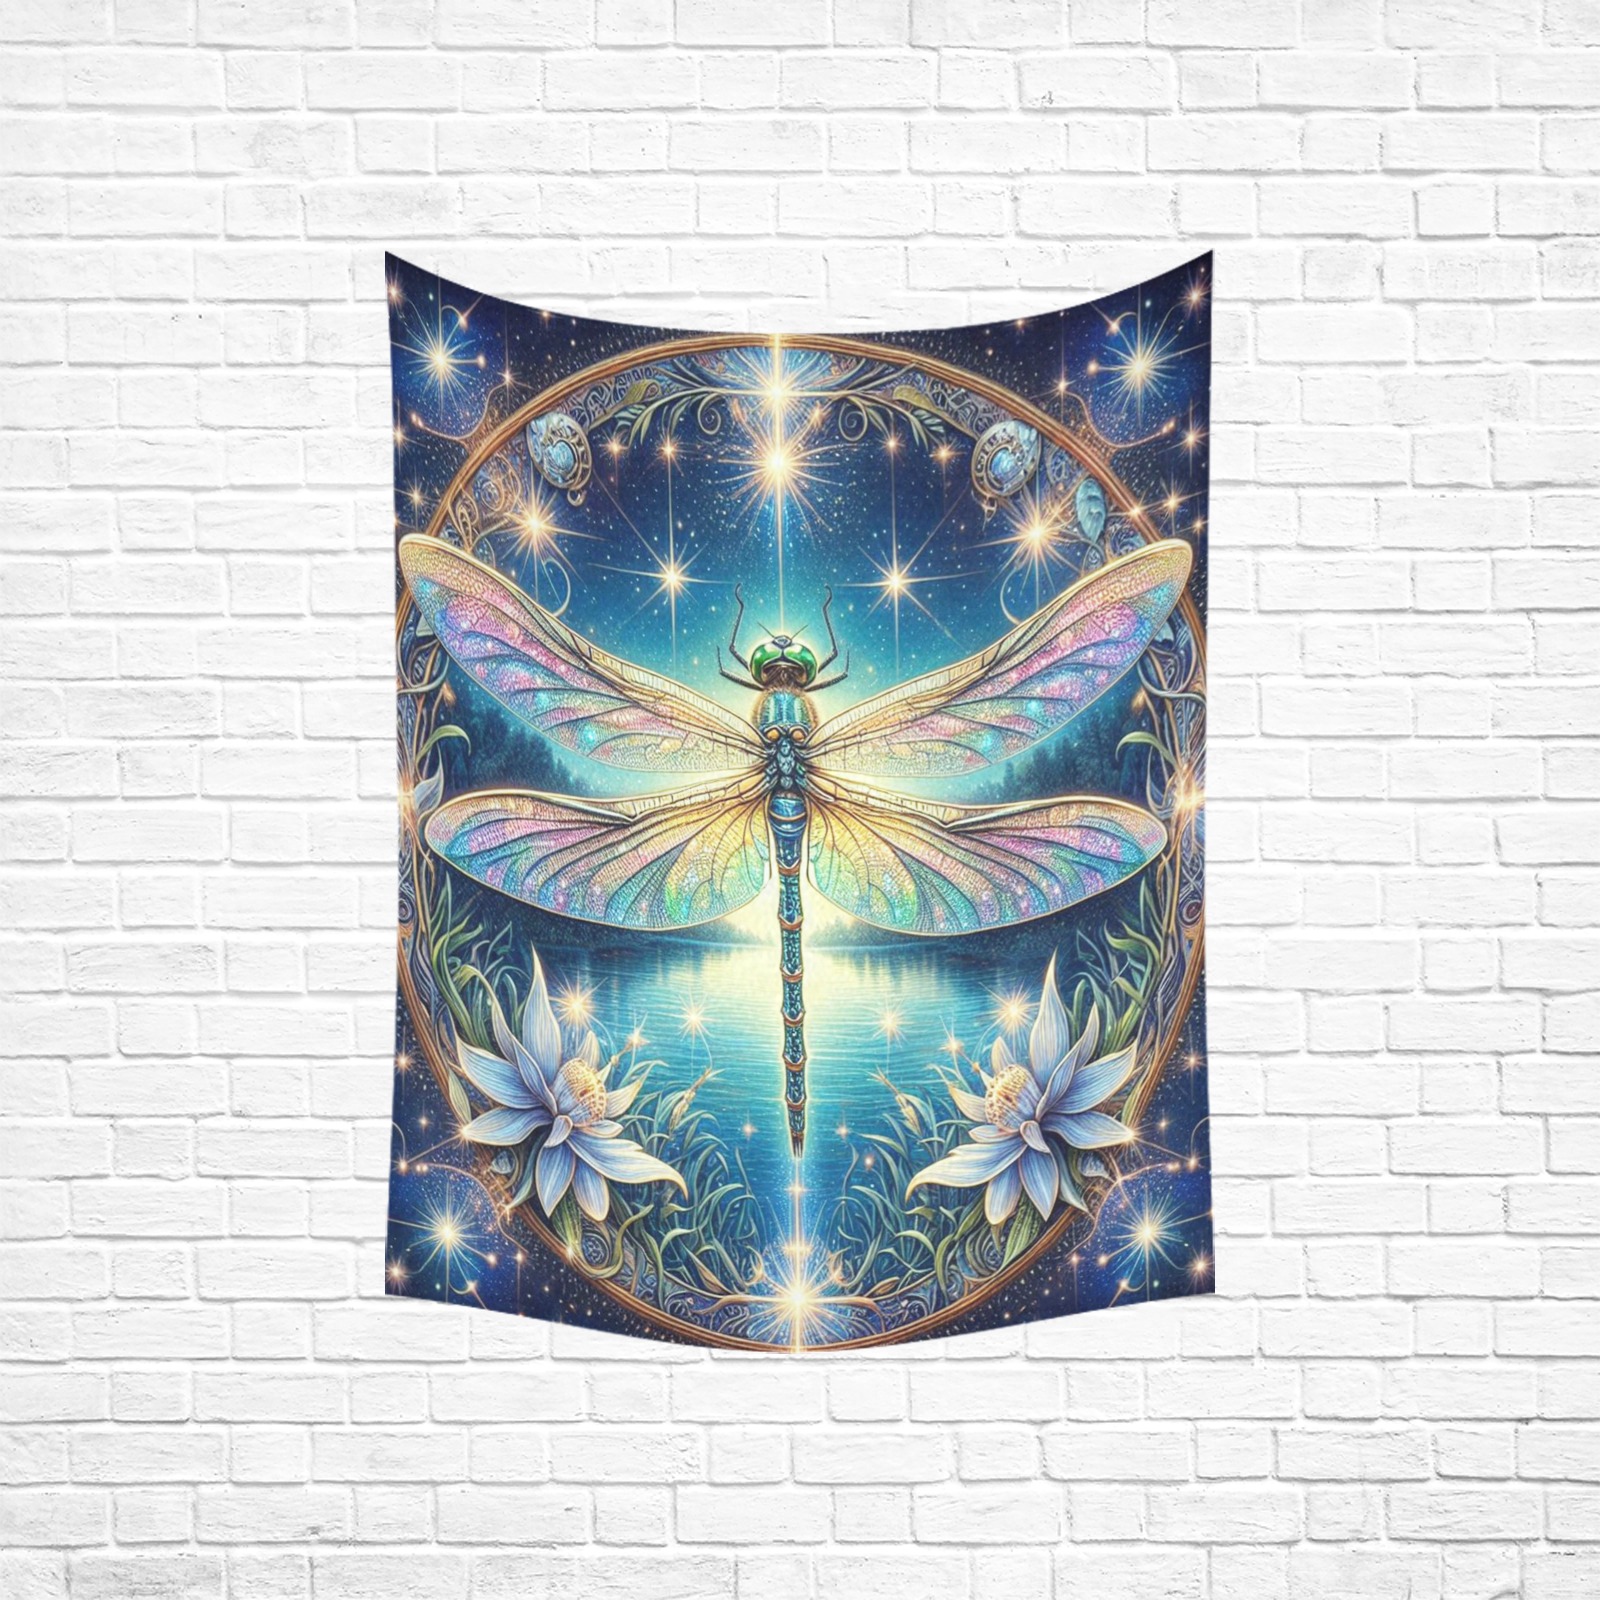 Dragonfly Sparkle Polyester Peach Skin Wall Tapestry 30"x 40"